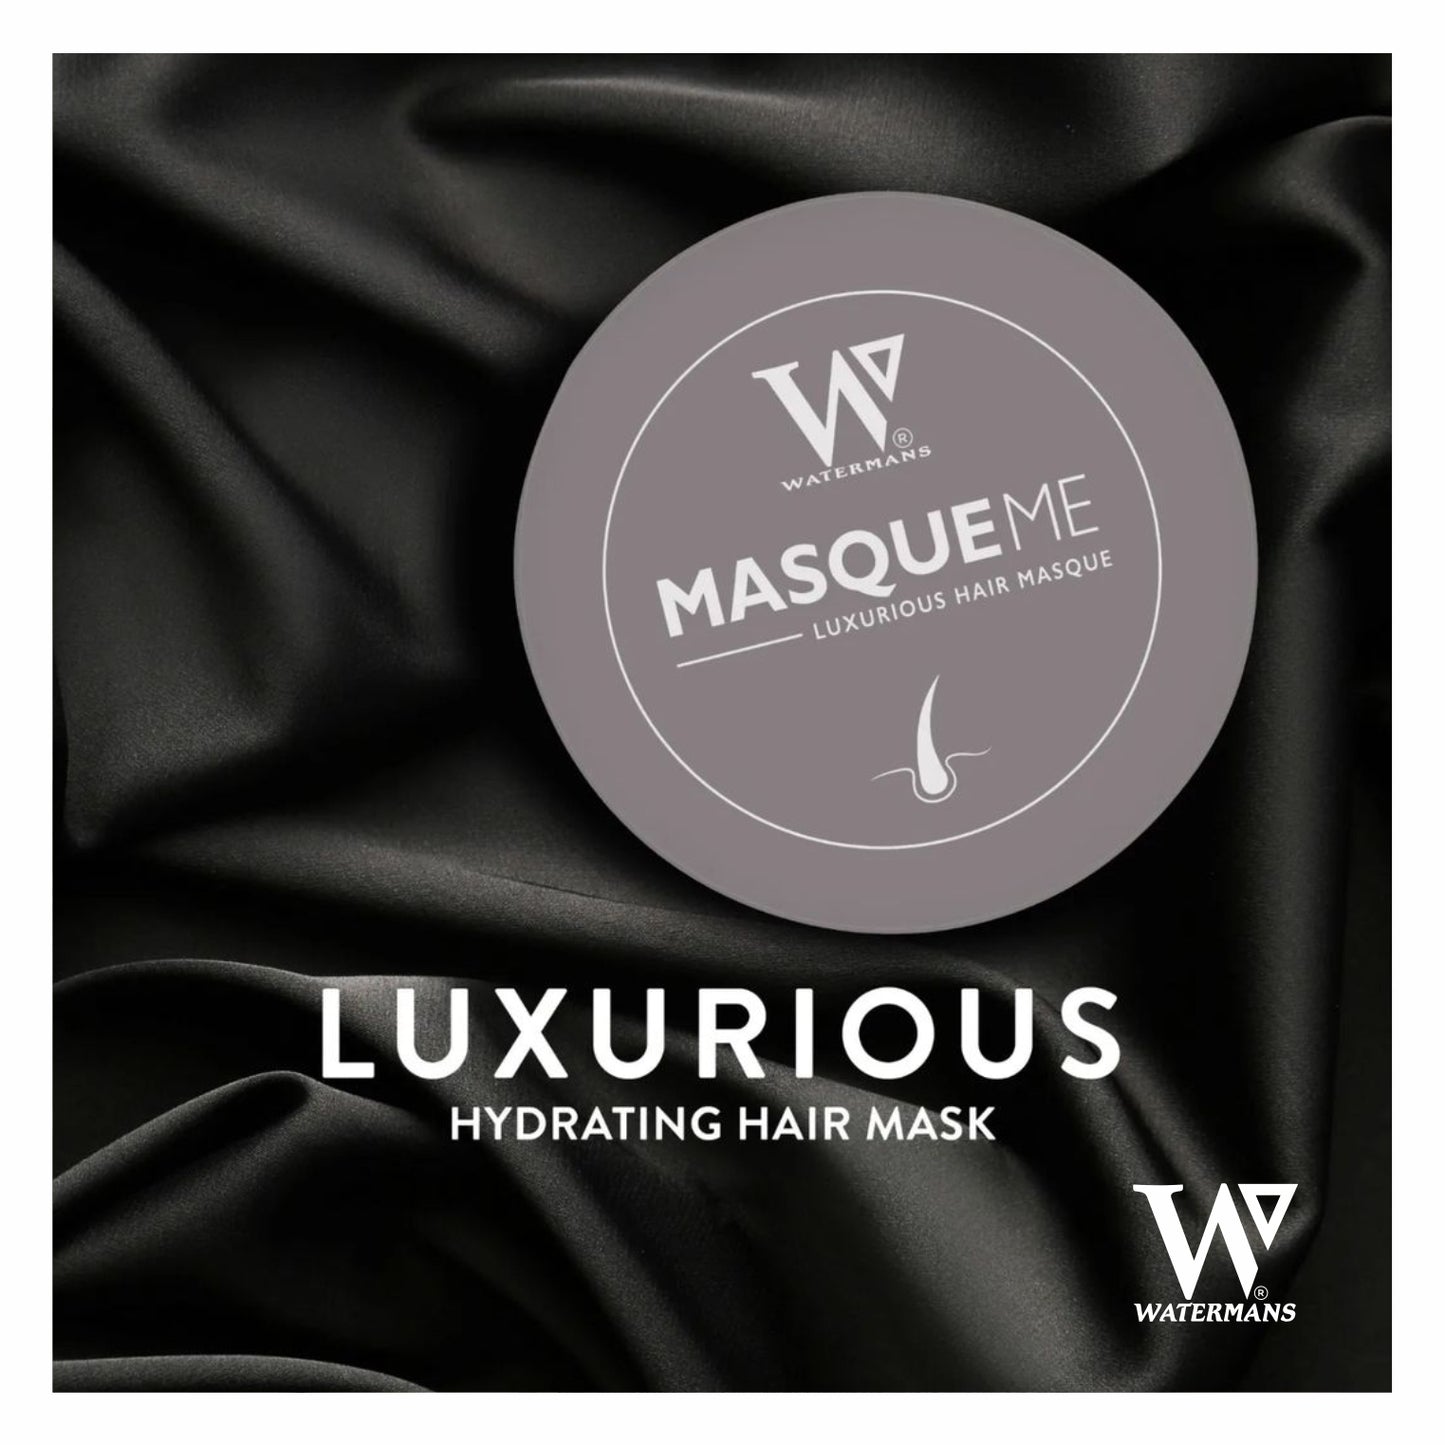 MasqueMe Hair Mask | Hair Growth Mask | For Dry, Damaged & Normal Hair